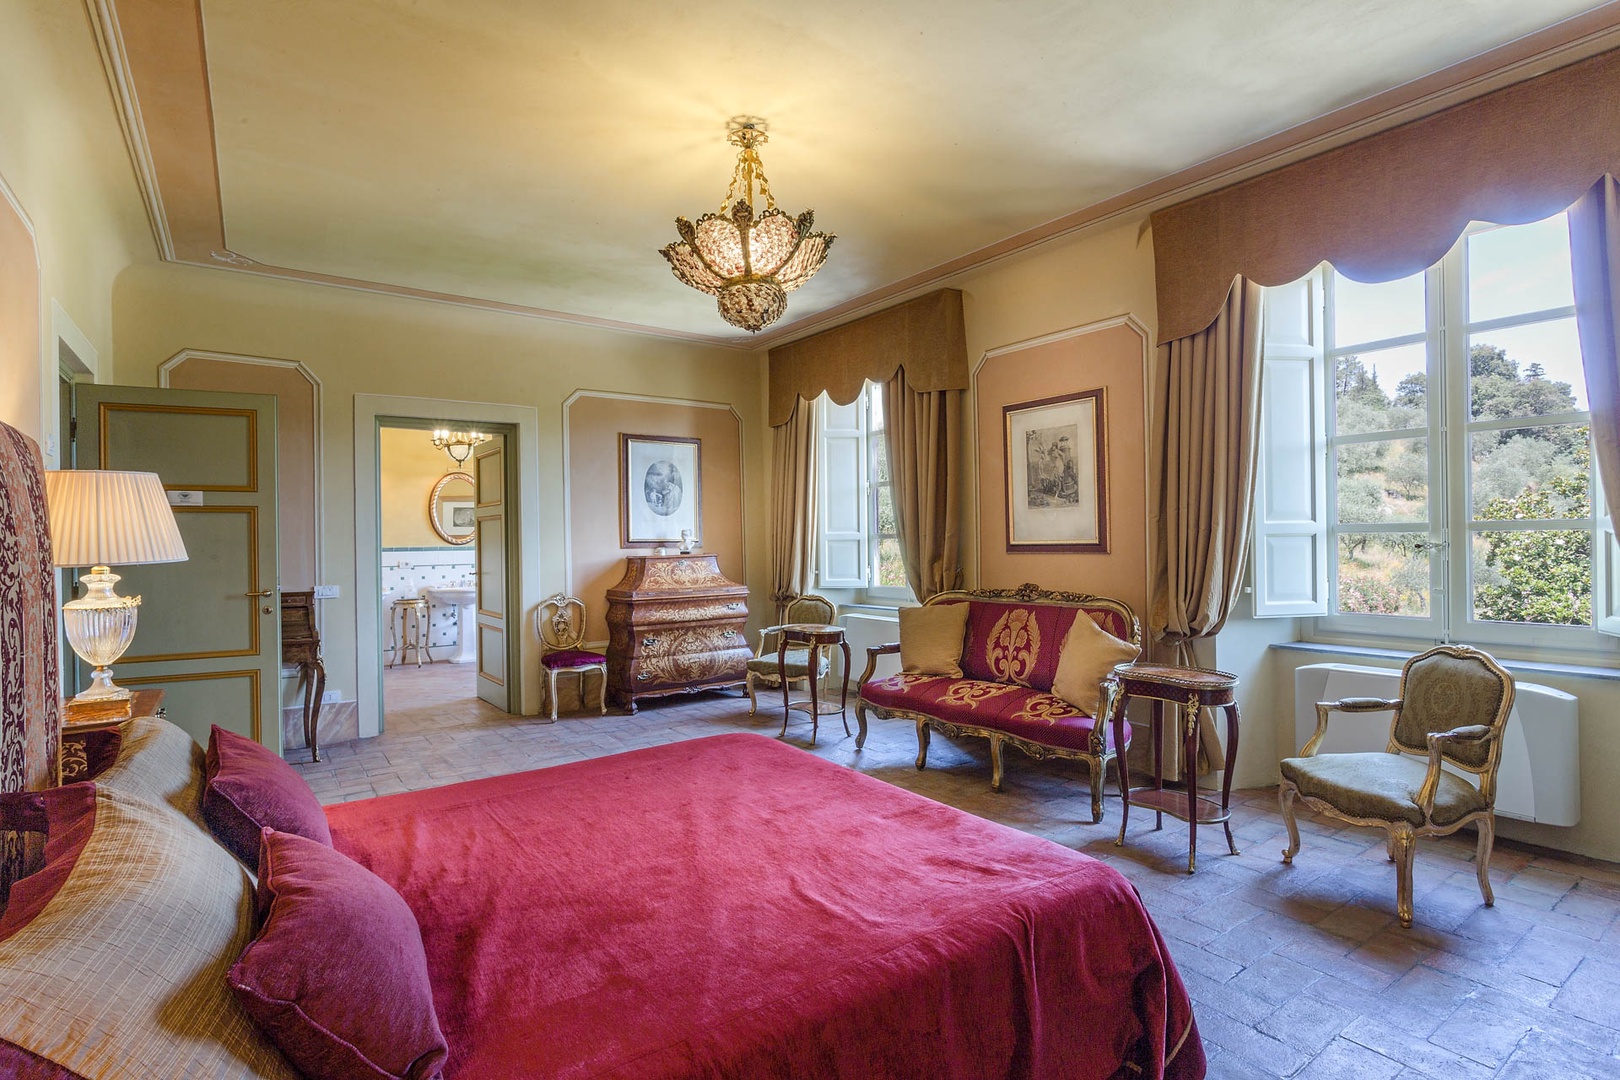 Old world heritage abounds in all the bedrooms